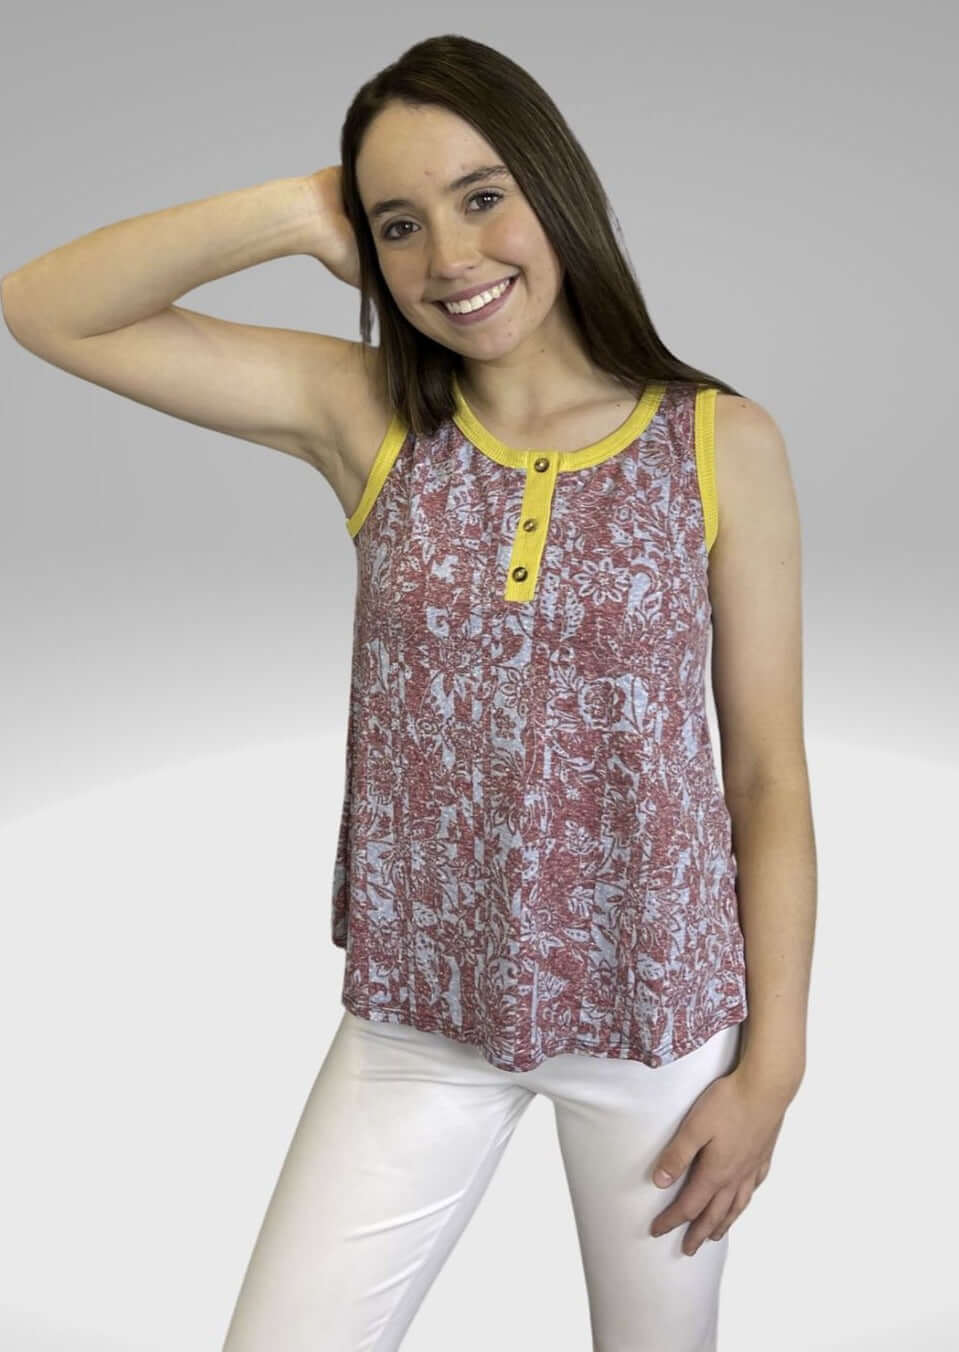 Floral Print Ladies Faded Out Henley Tank Top Available in Teal & Burgundy with Mustard Collar | Made in USA | Classy Cozy Cool American Boutique